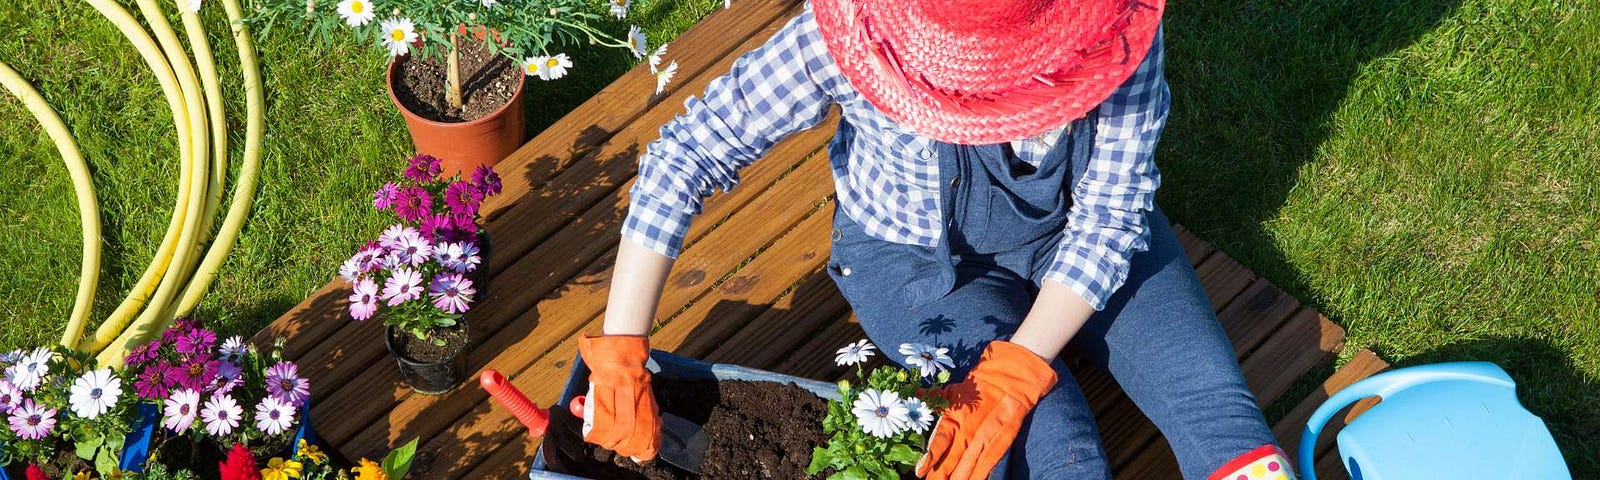 Photo of woman dressed in gardening clothes, seated and working the soil of planted flowers.